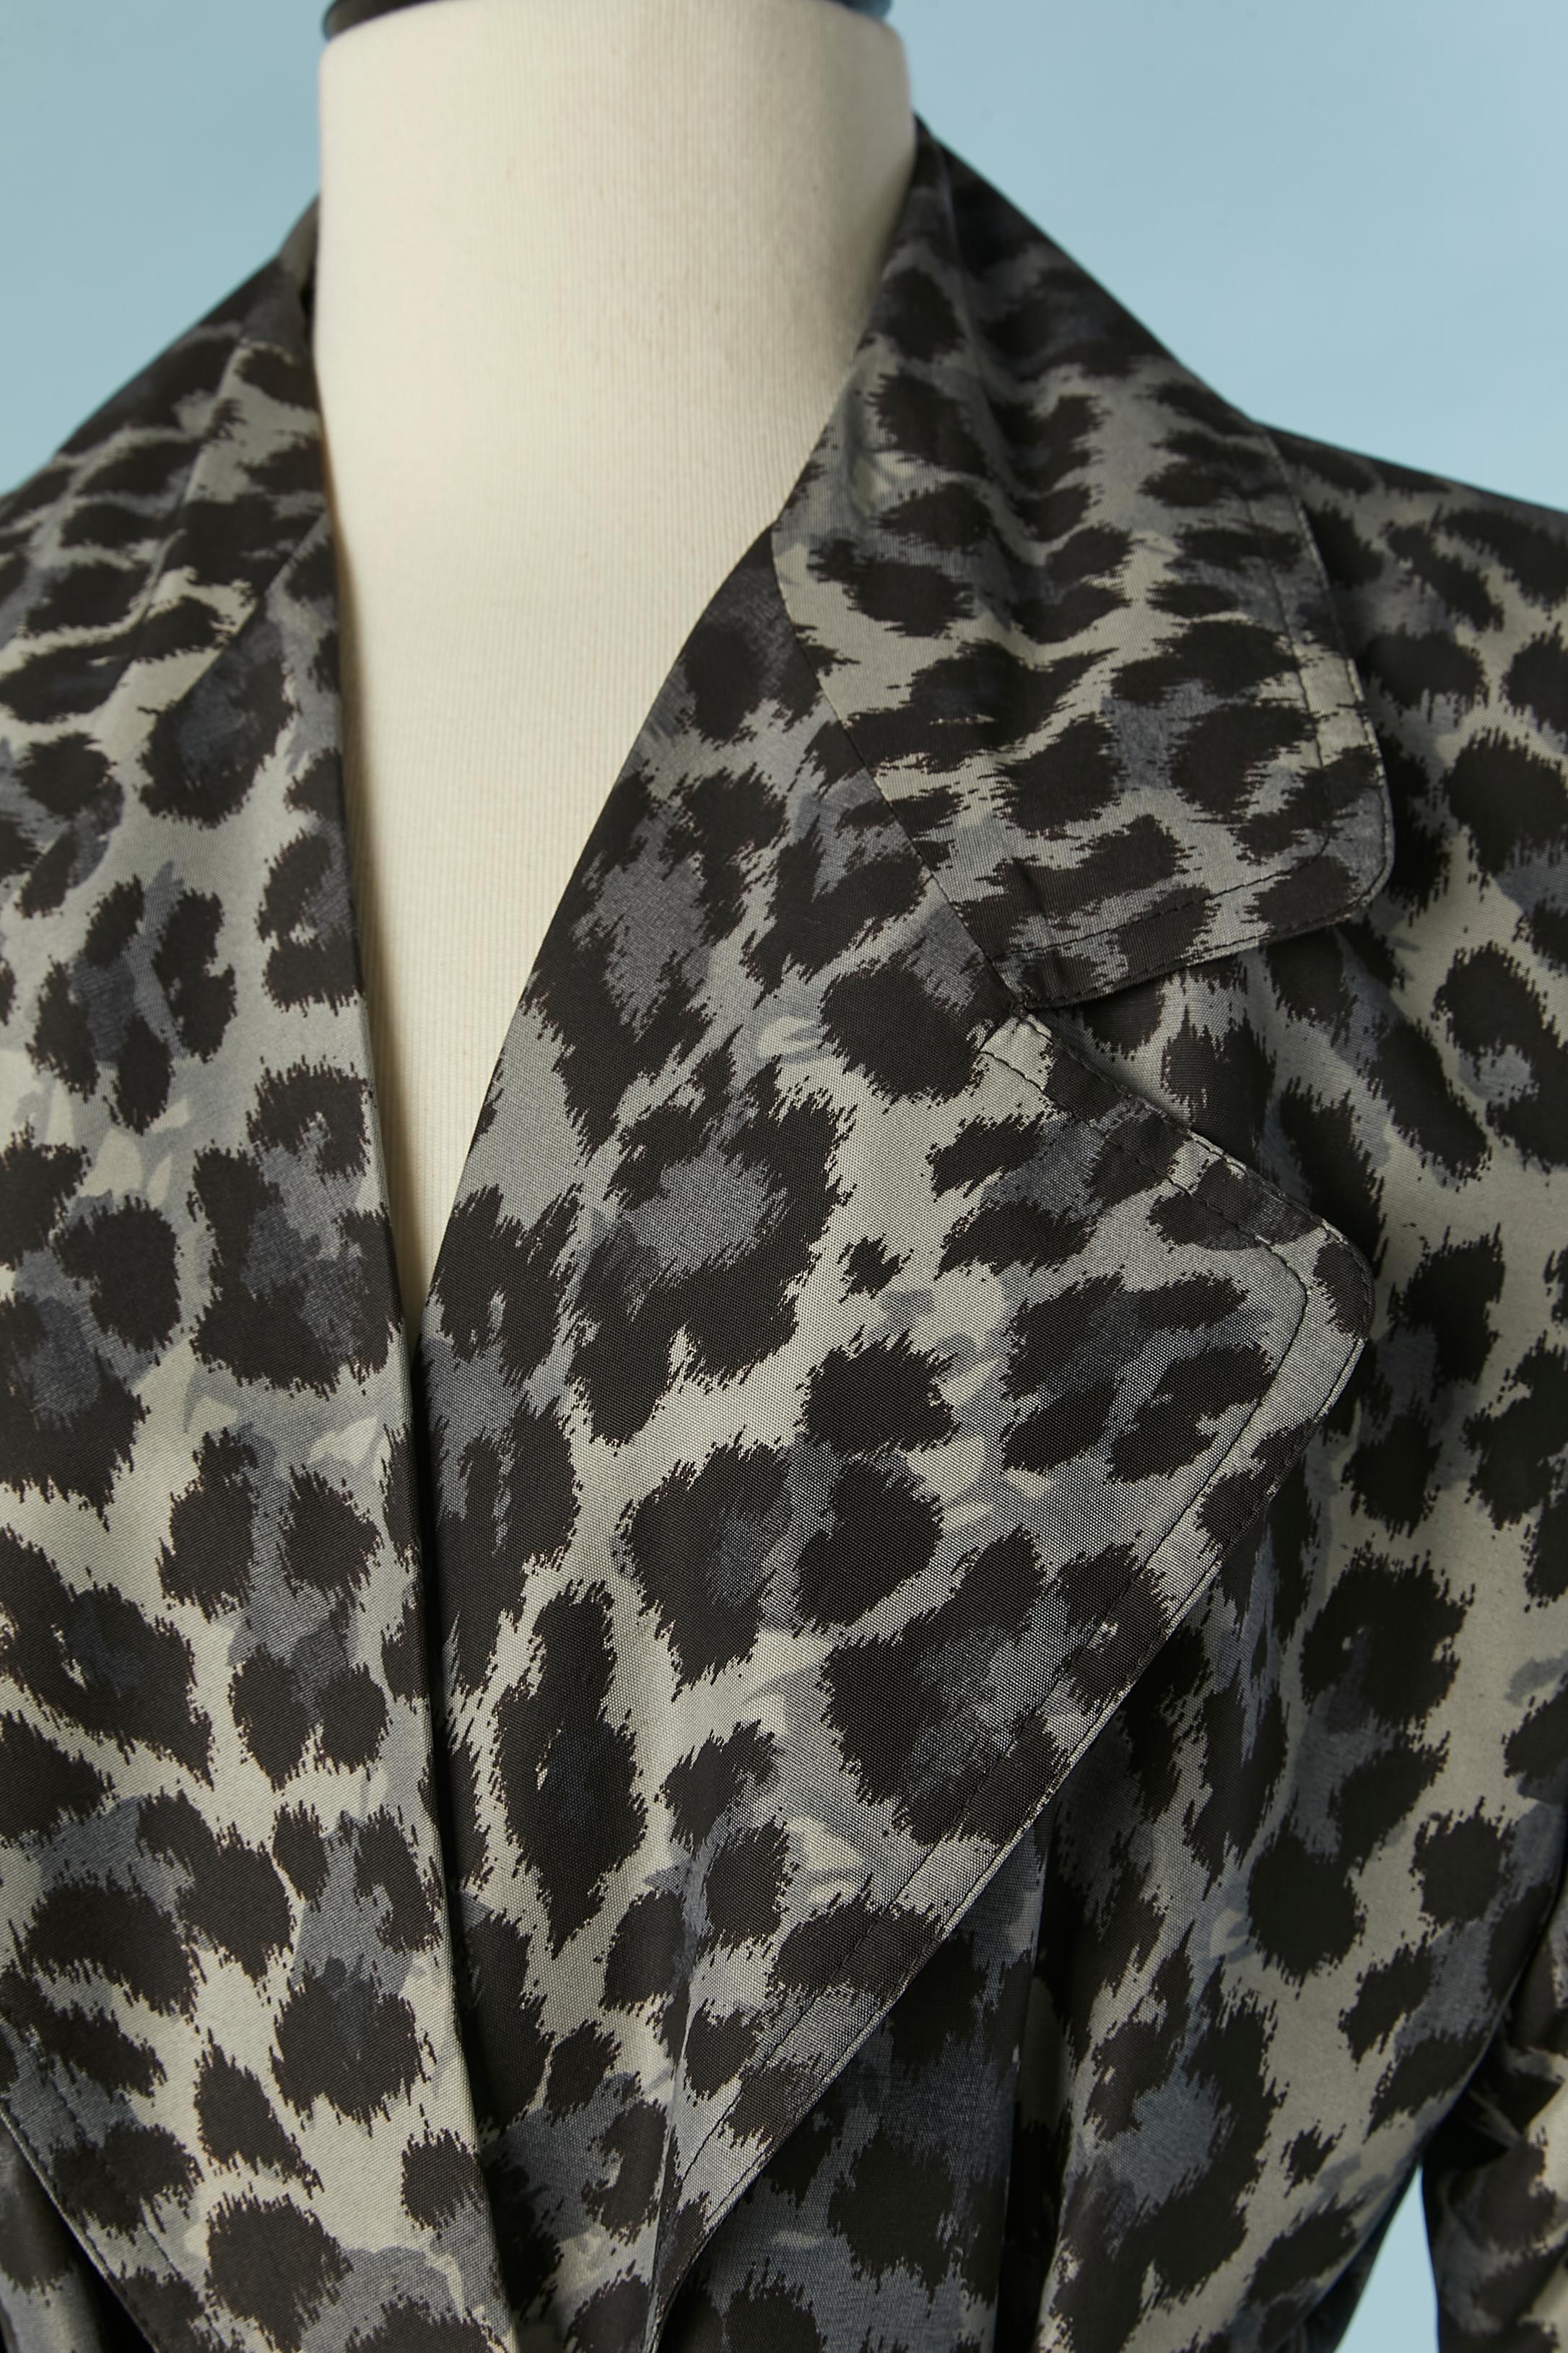 Trench-coat with animal print and belt. The fabric composition tag has been cut but the main fabric is probably nylon or rayon and the branded lining is probably acetate or rayon. Branded buttons
Shoulder-pad. Belt and belt-loop. 
SIZE L 